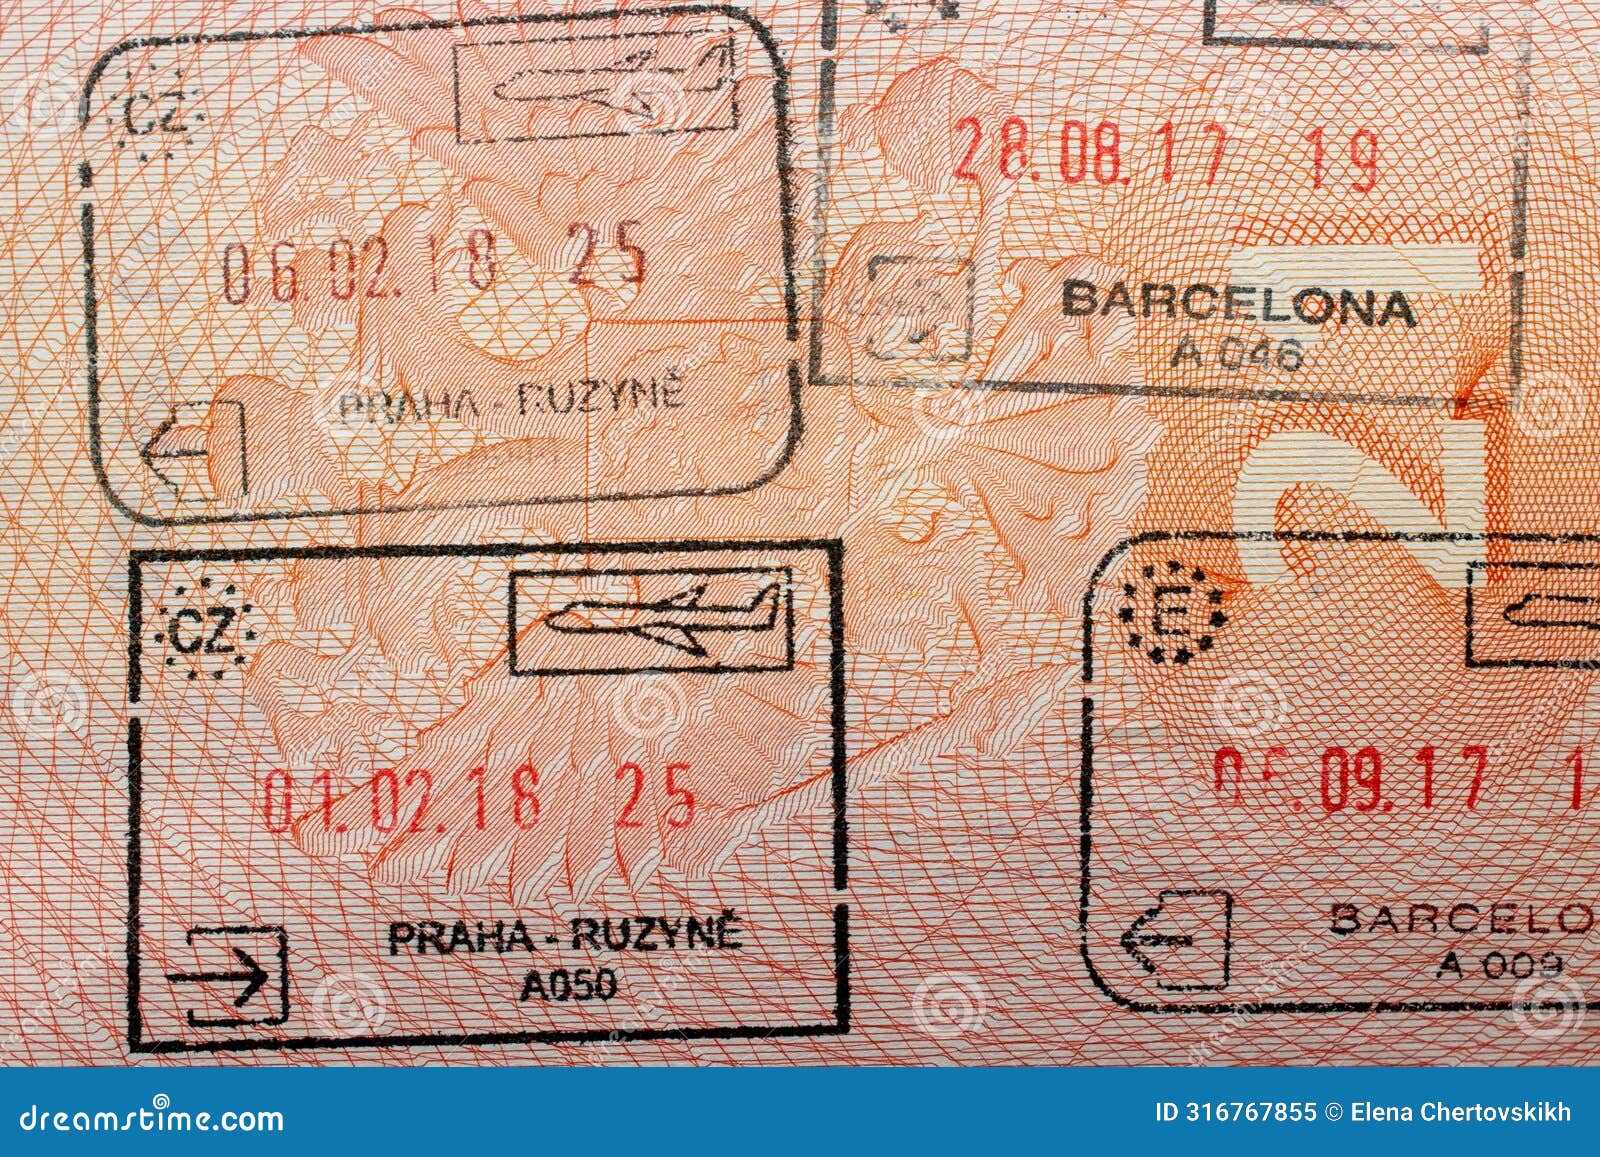 stamps in a travel passport, entry and exit stamp, emigration, immigration, tourism concept